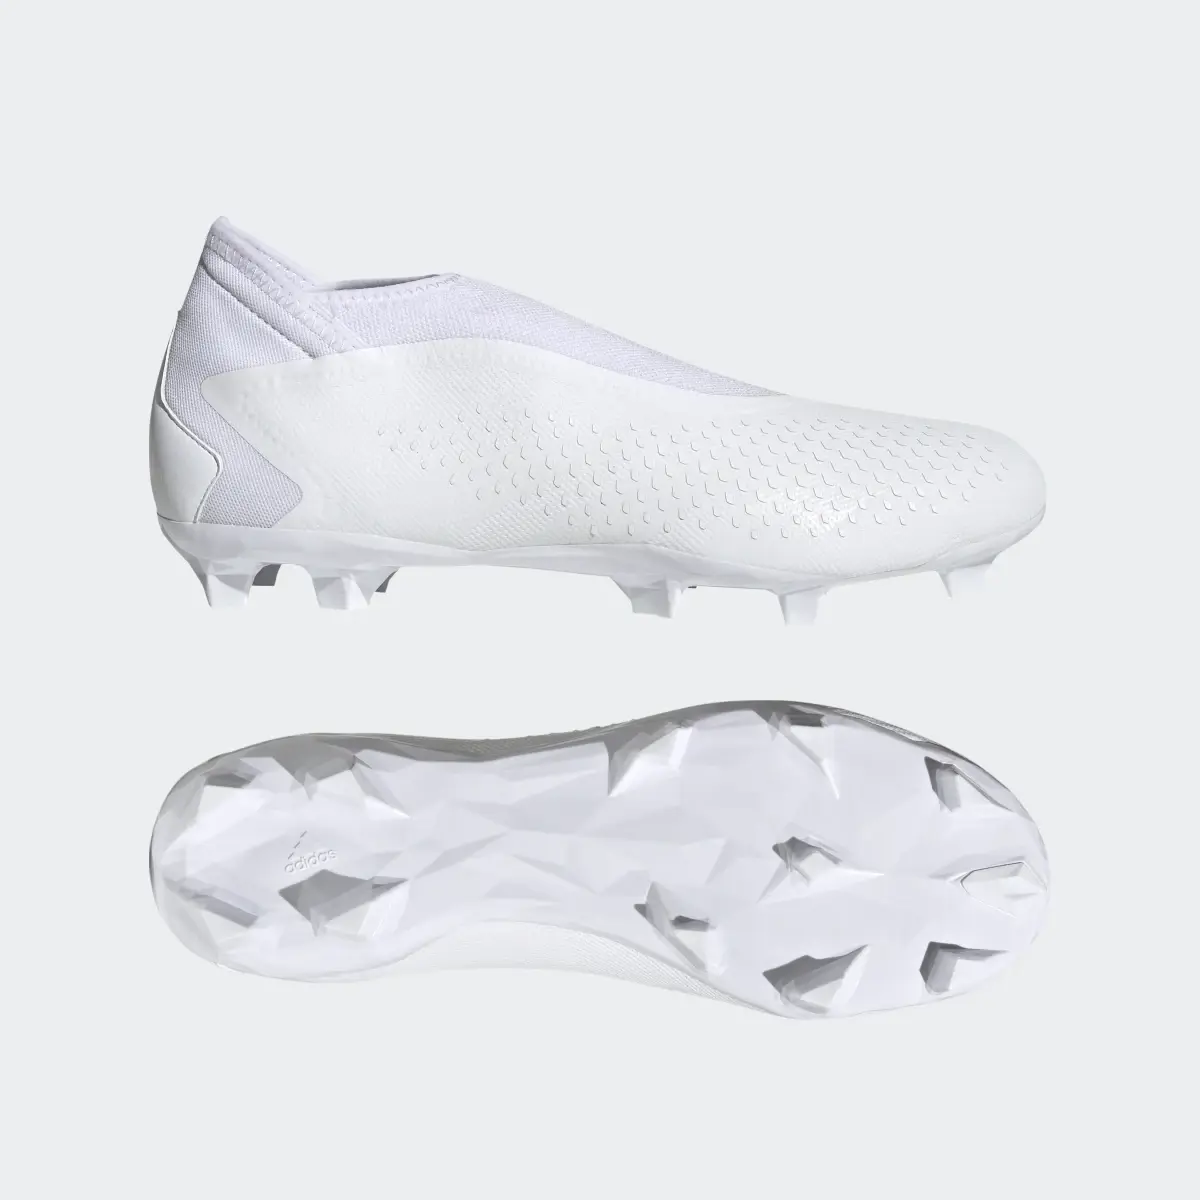 Adidas Predator Accuracy.3 Laceless Firm Ground Soccer Cleats. 1